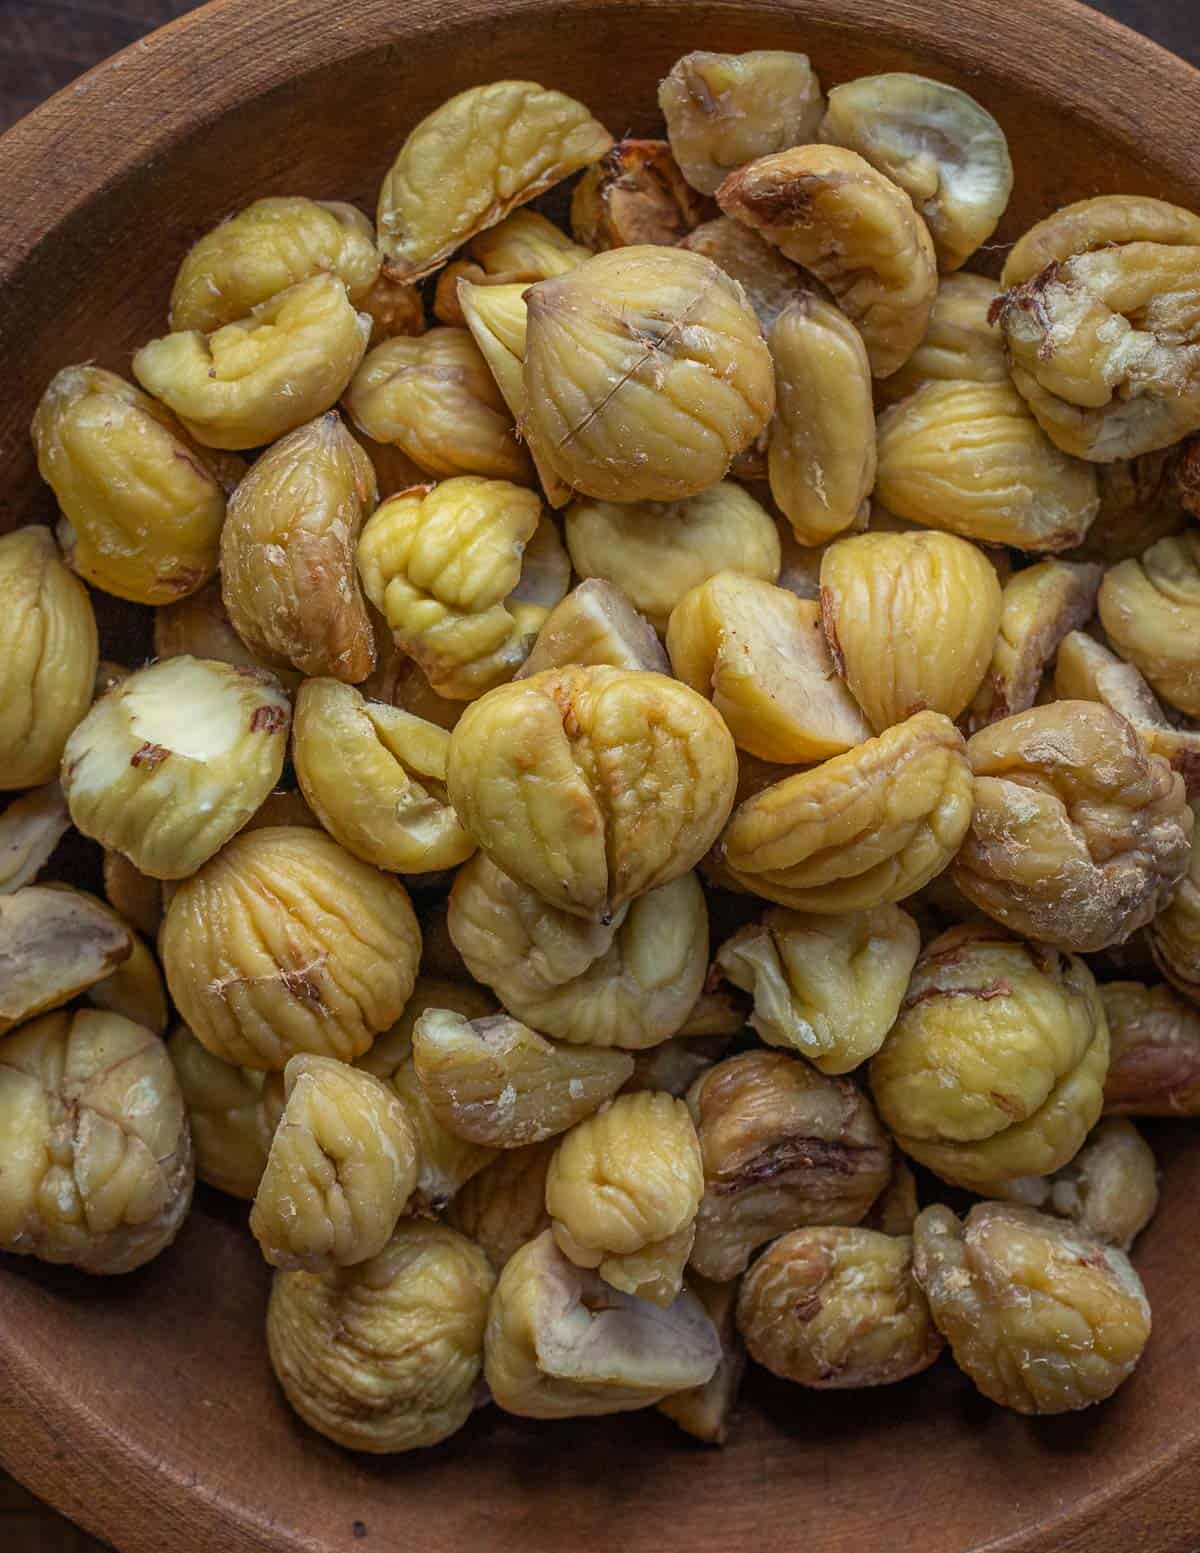 A close up image of a wooden bowl filled with freshly cooked chestnuts.